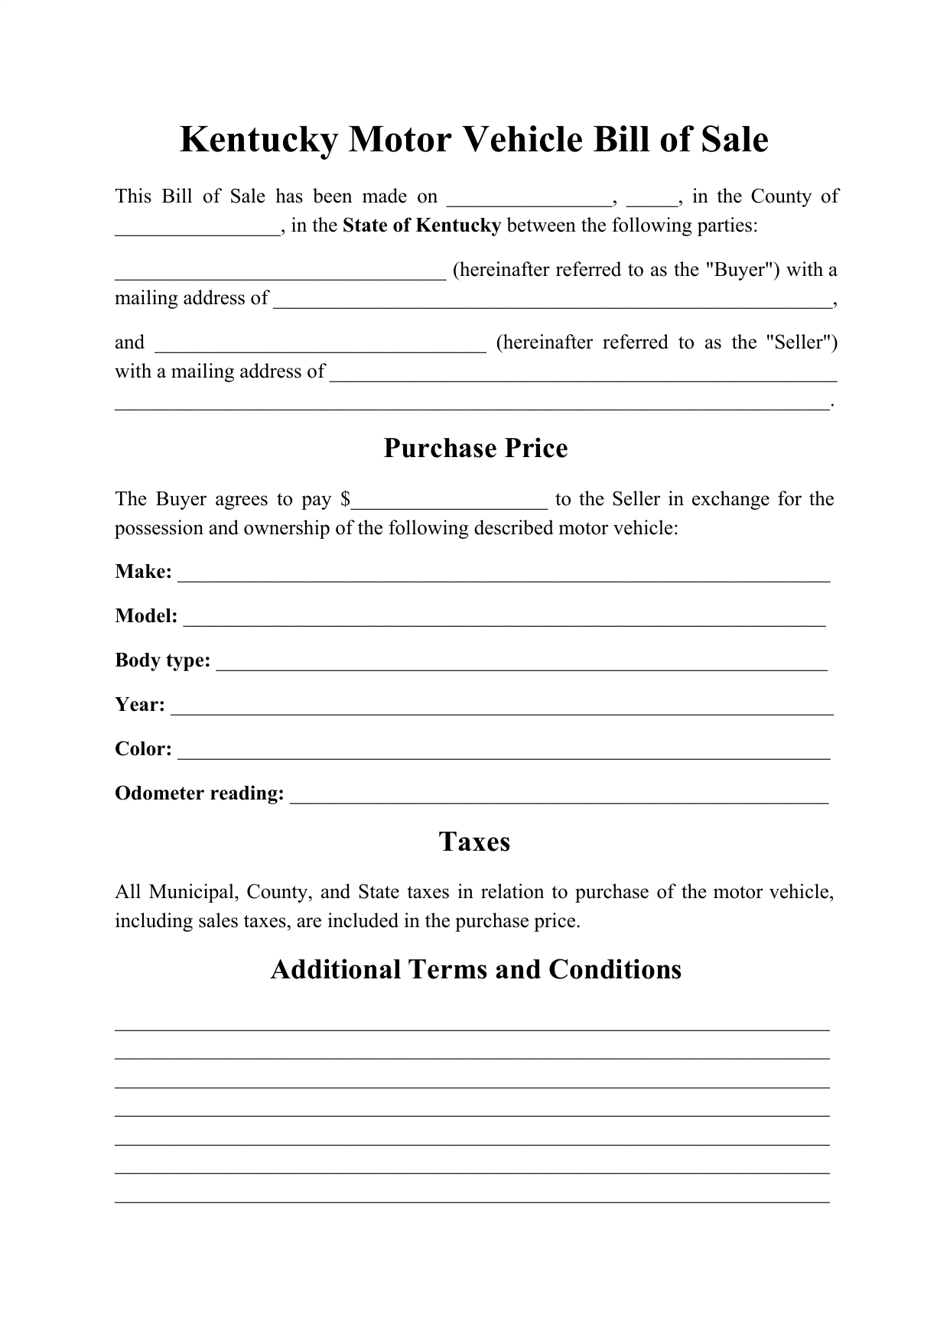 Motor Vehicle Bill of Sale Form - Kentucky, Page 1